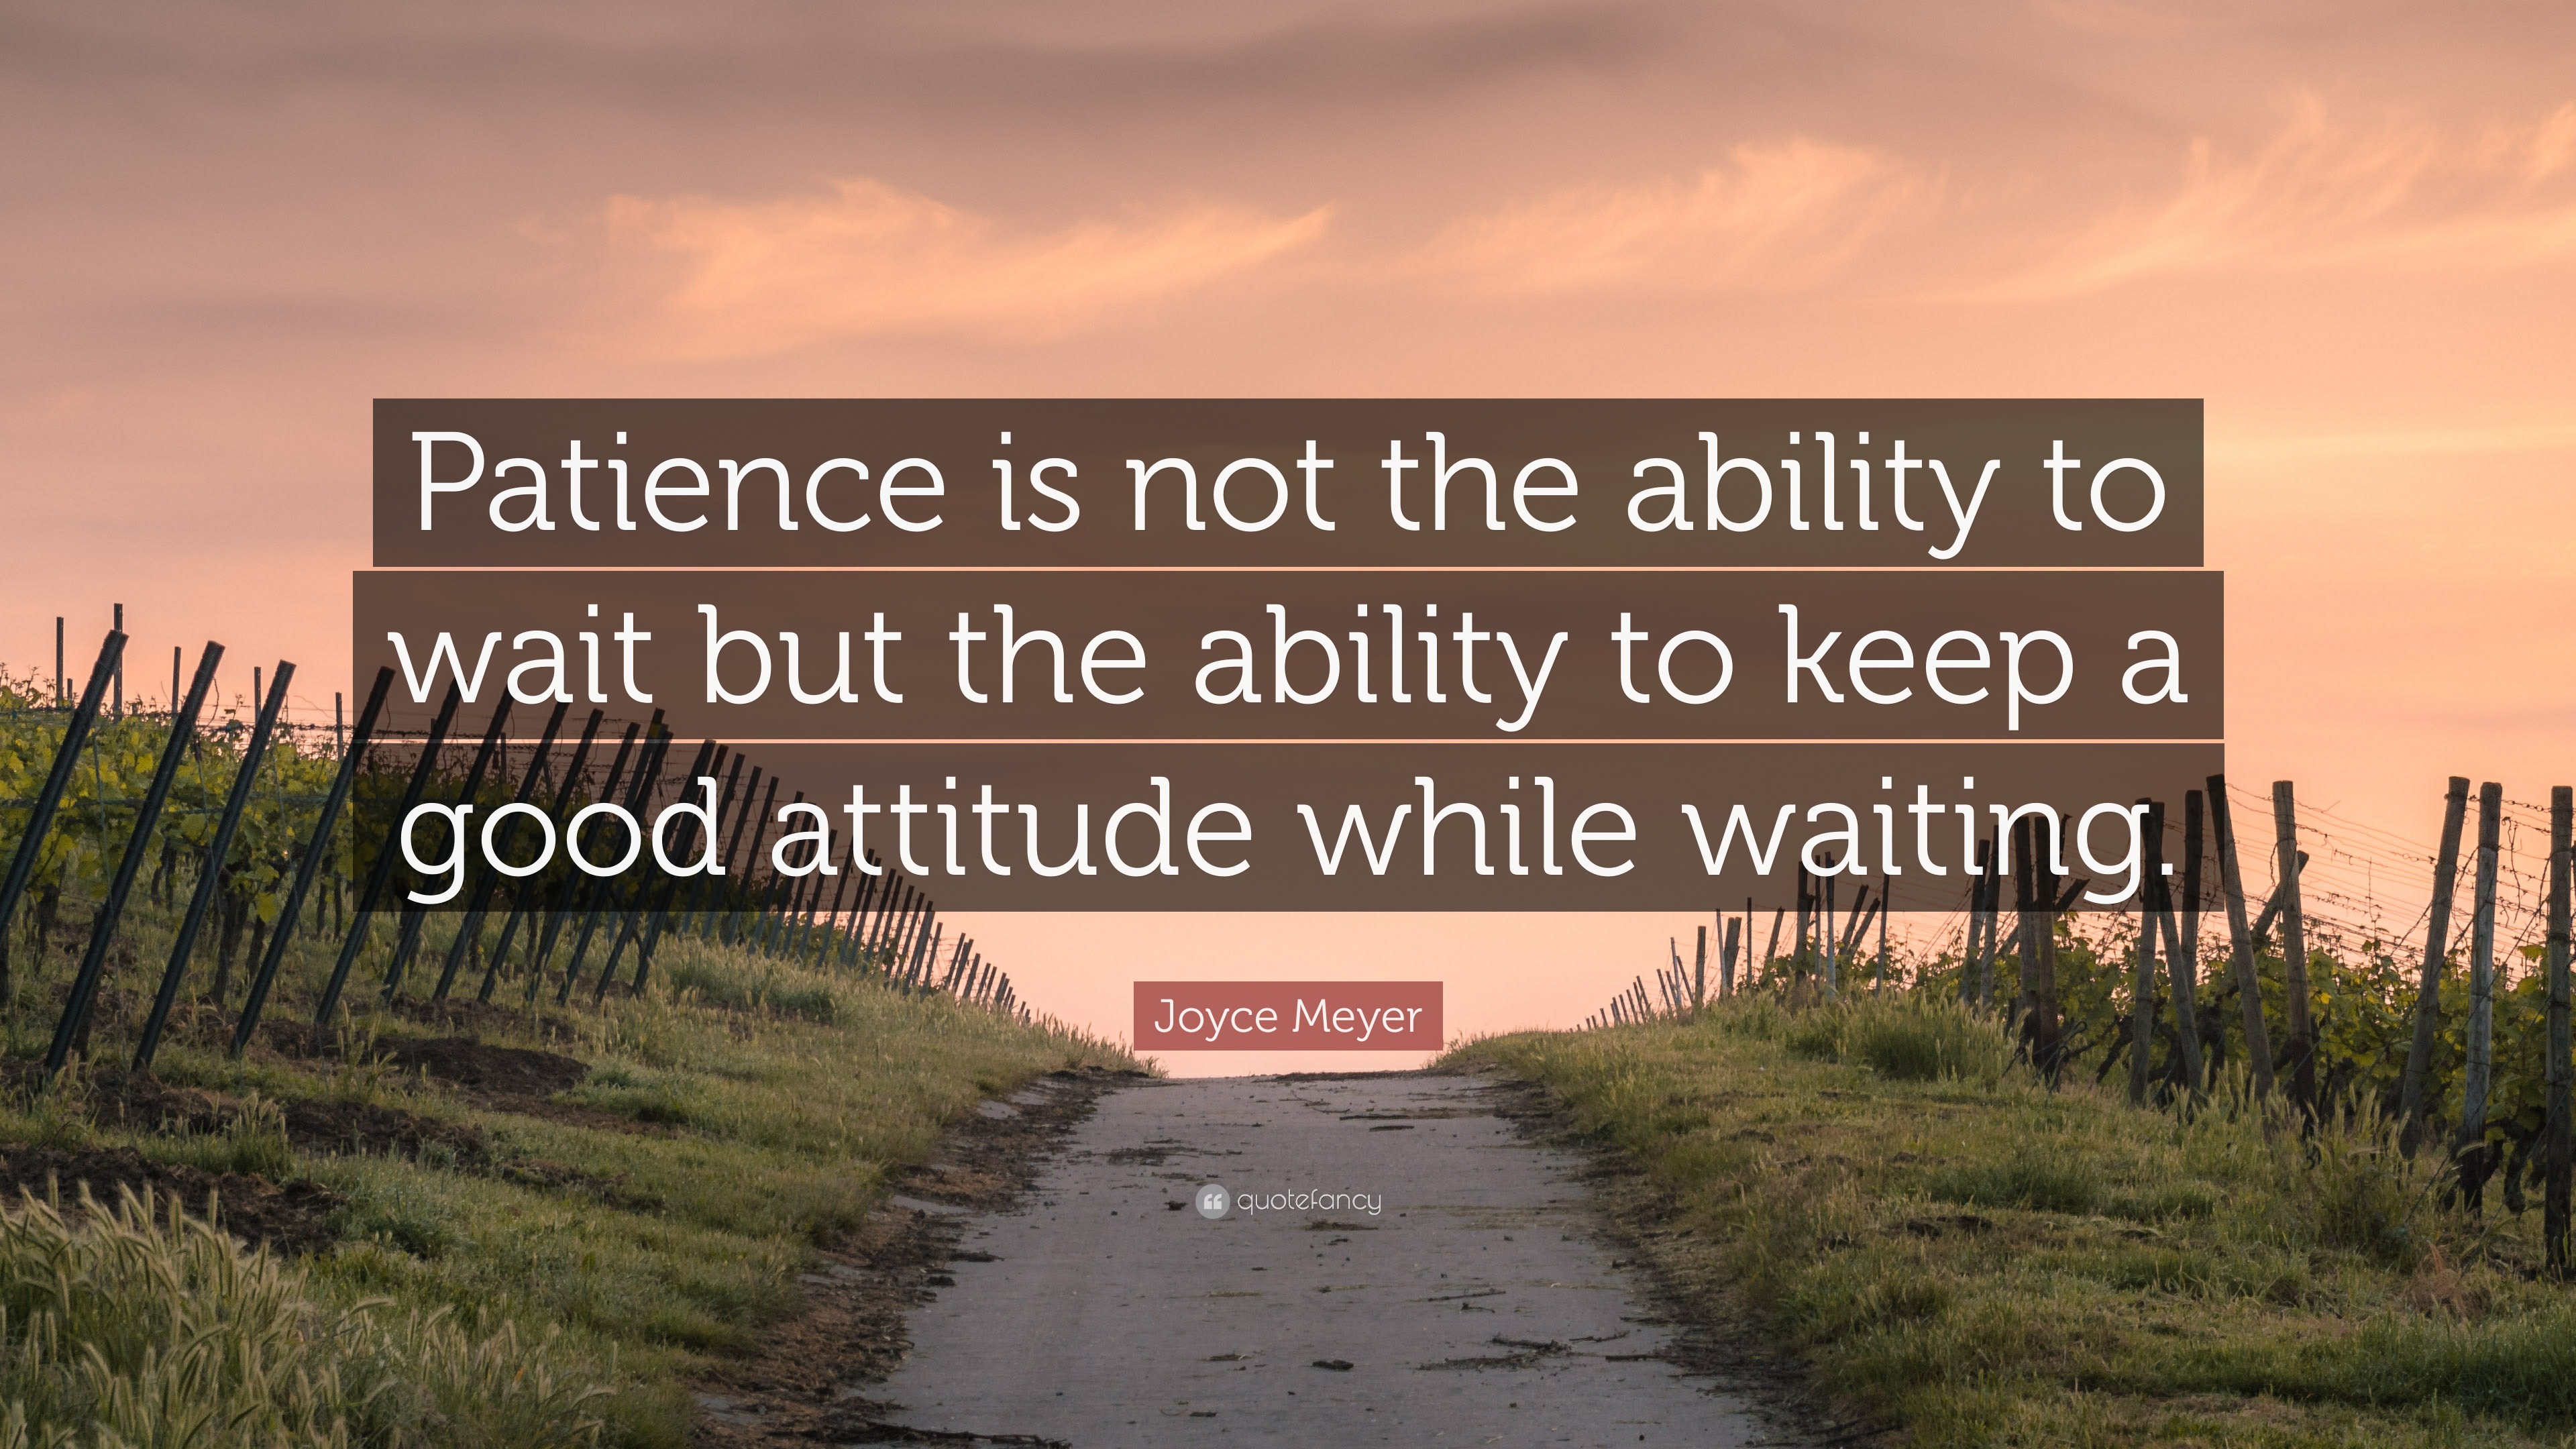 Joyce Meyer Quote: “Patience is not the ability to wait but the ability